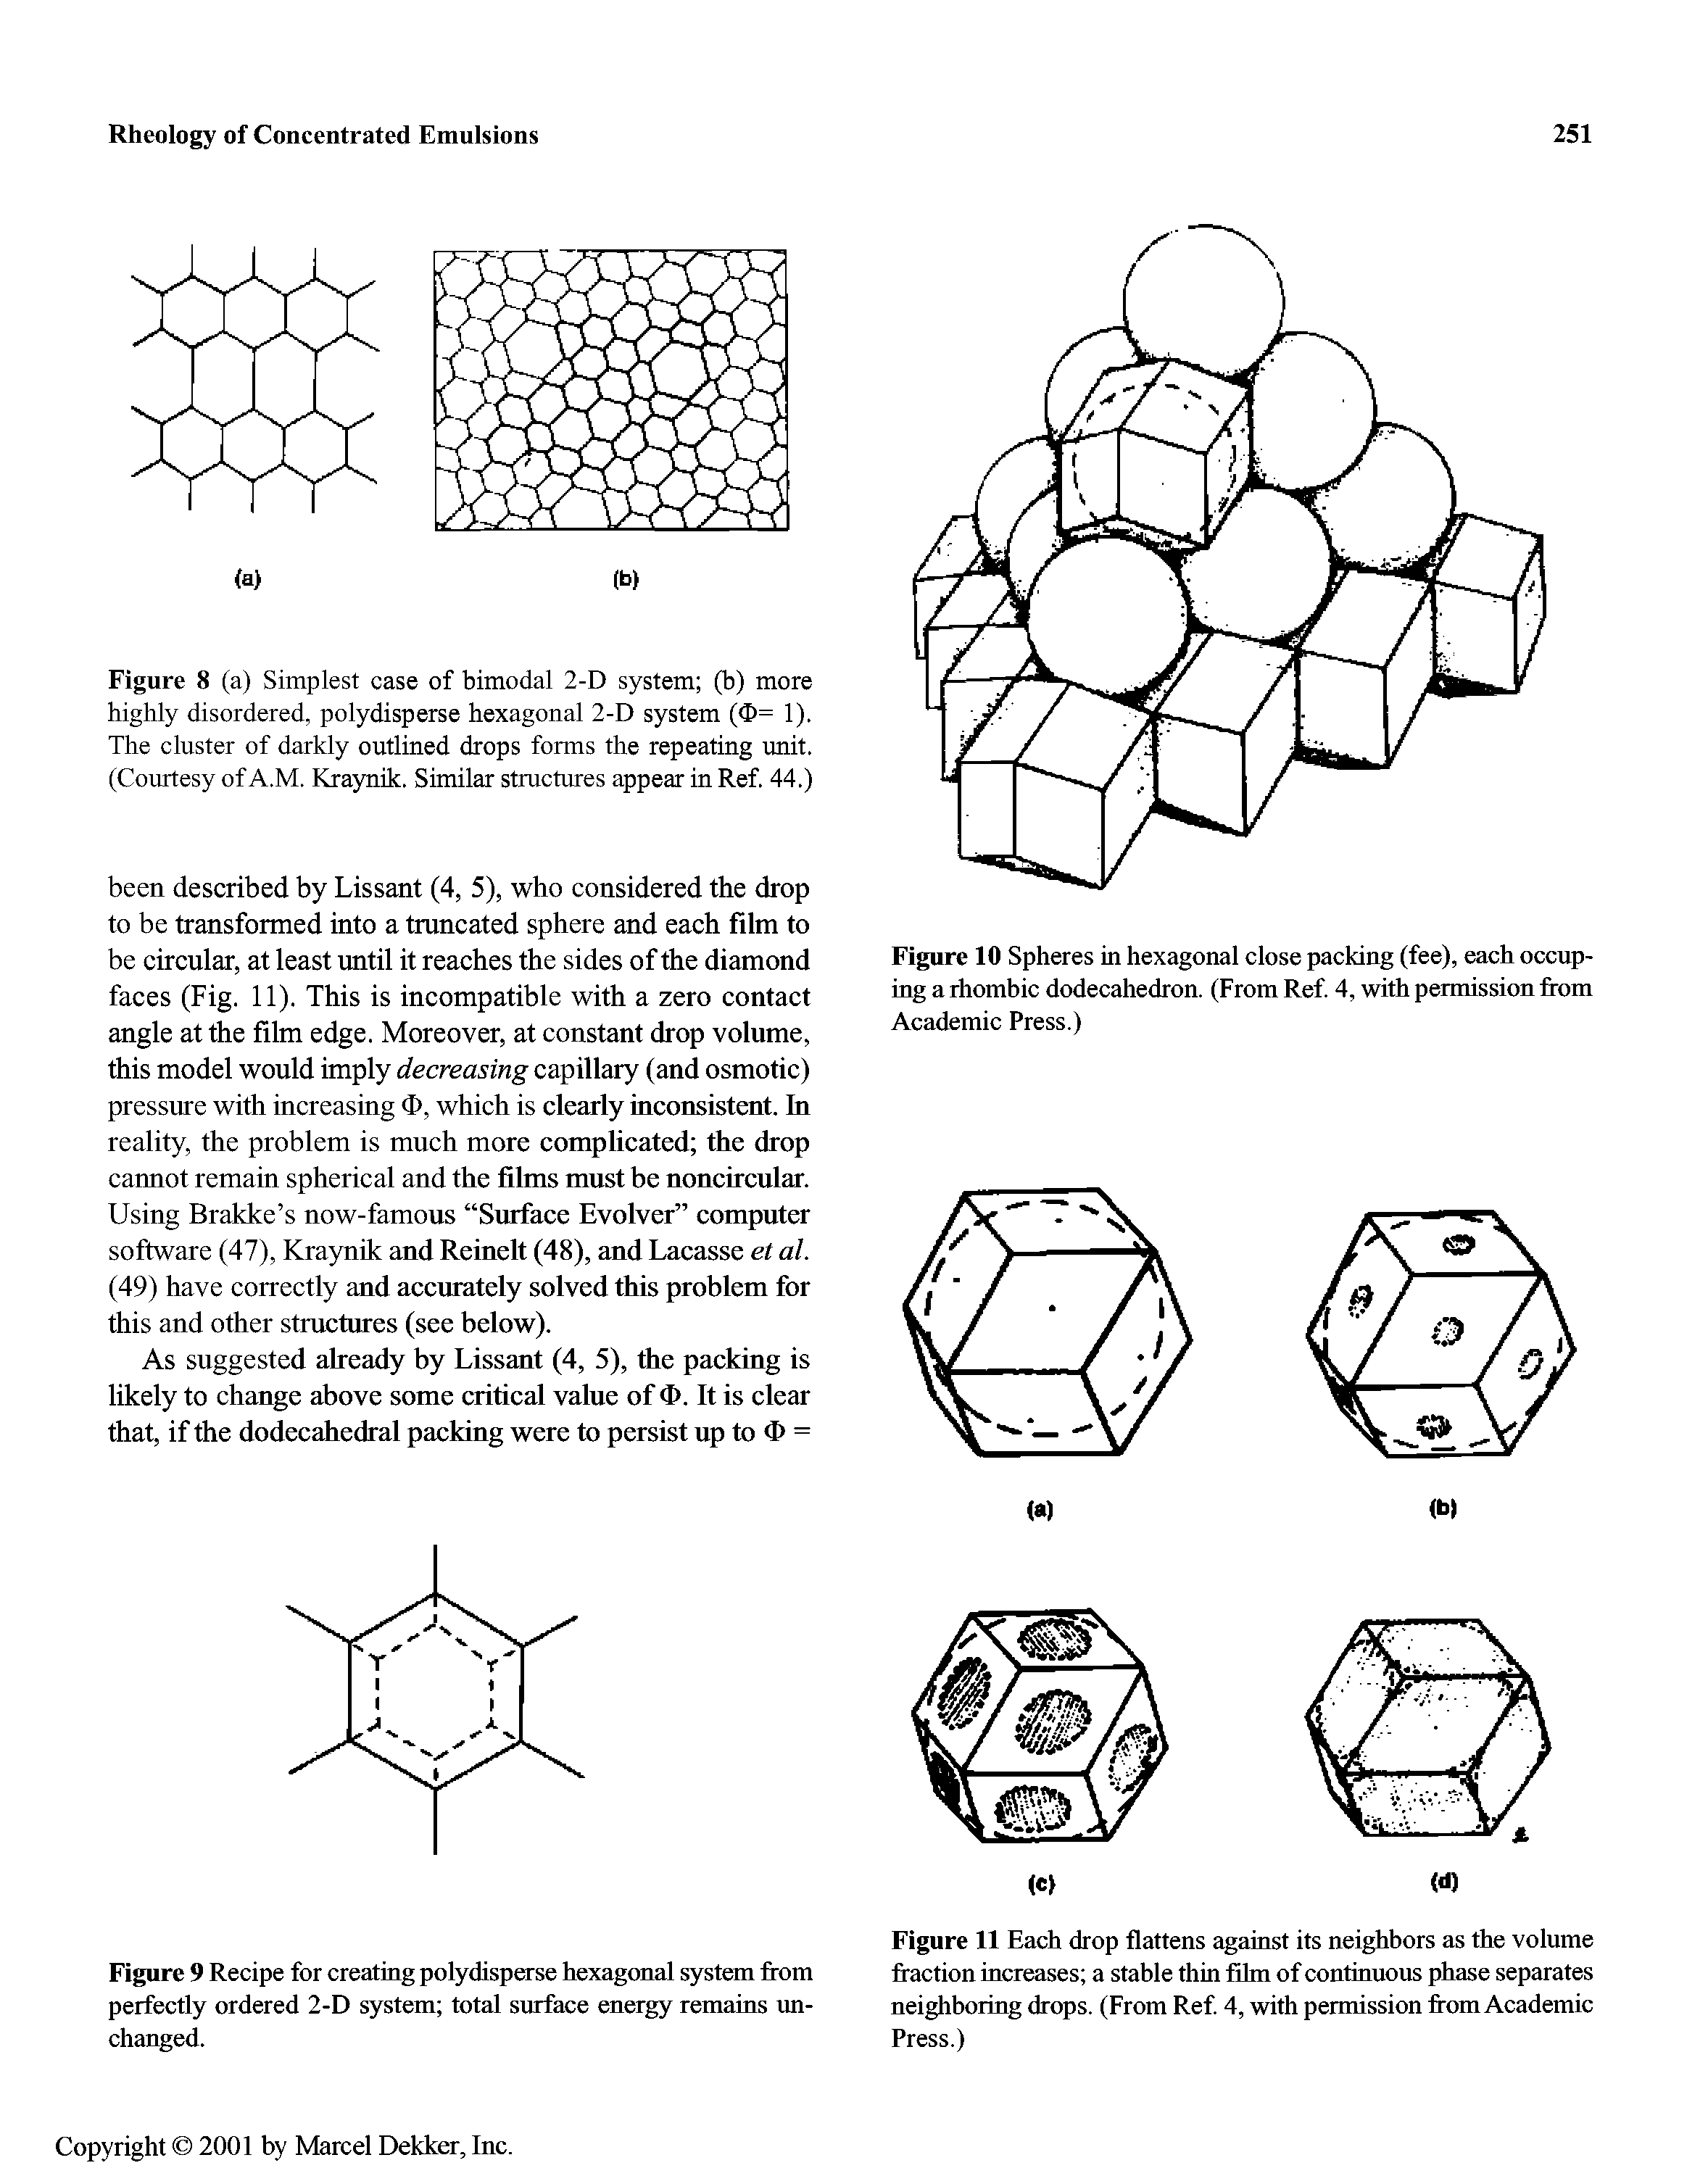 Figure 9 Recipe for creating polydisperse hexagonal system from perfectly ordered 2-D system total surface energy remains unchanged.